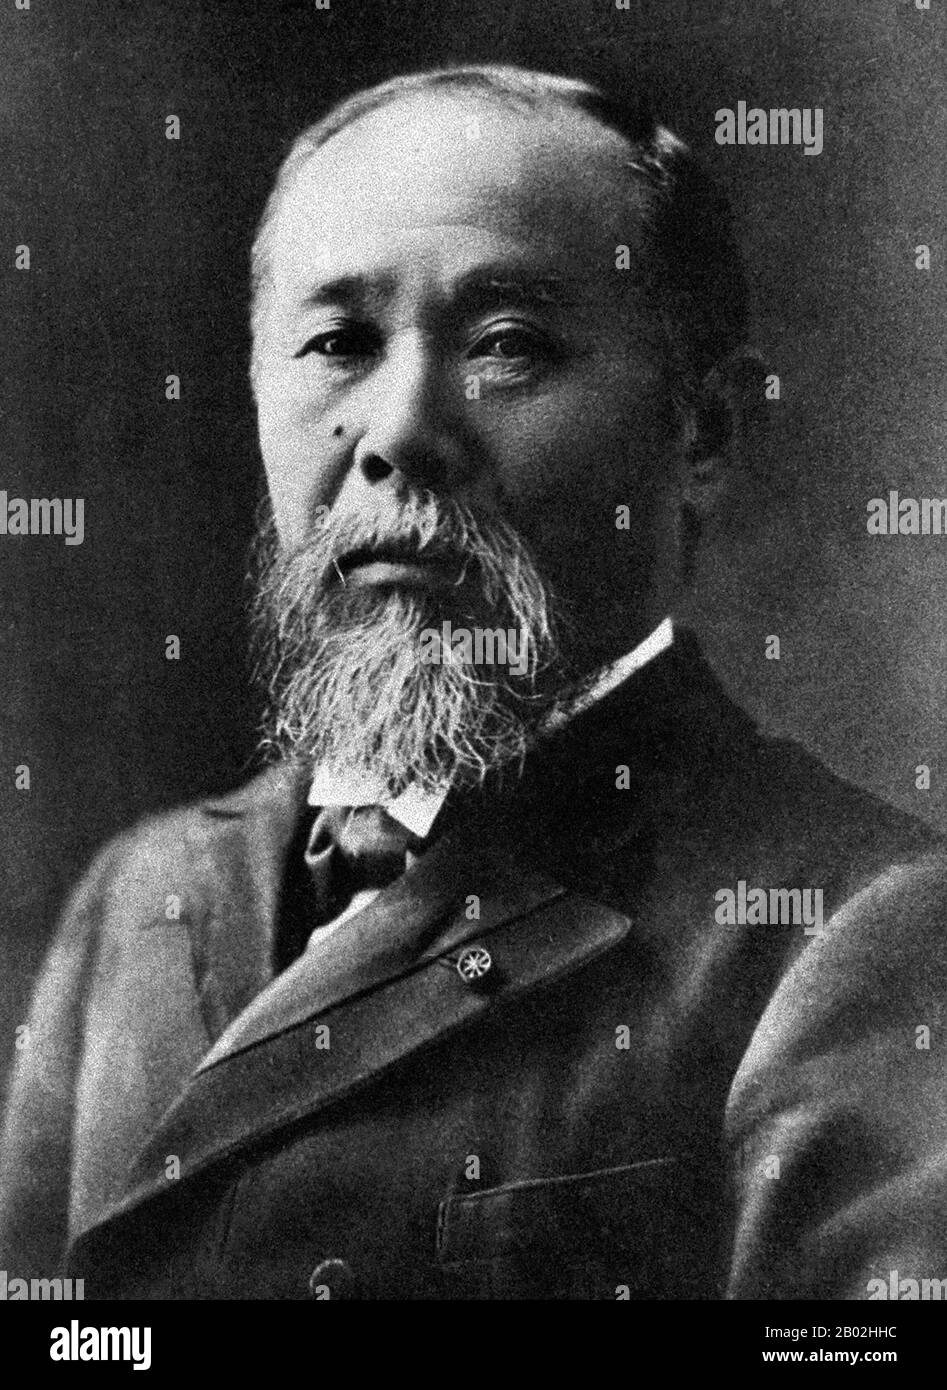 Prince Itō Hirobumi, (伊藤 博文?, October 16, 1841 – October 26, 1909, also called Hirofumi / Hakubun and Shunsuke in his youth) was a samurai of Chōshū domain, Japanese statesman, four time Prime Minister of Japan (the 1st, 5th, 7th and 10th), genrō and Resident-General of Korea.  Itō was assassinated by Korean independence activist An Jung-geun in 1909. Stock Photo